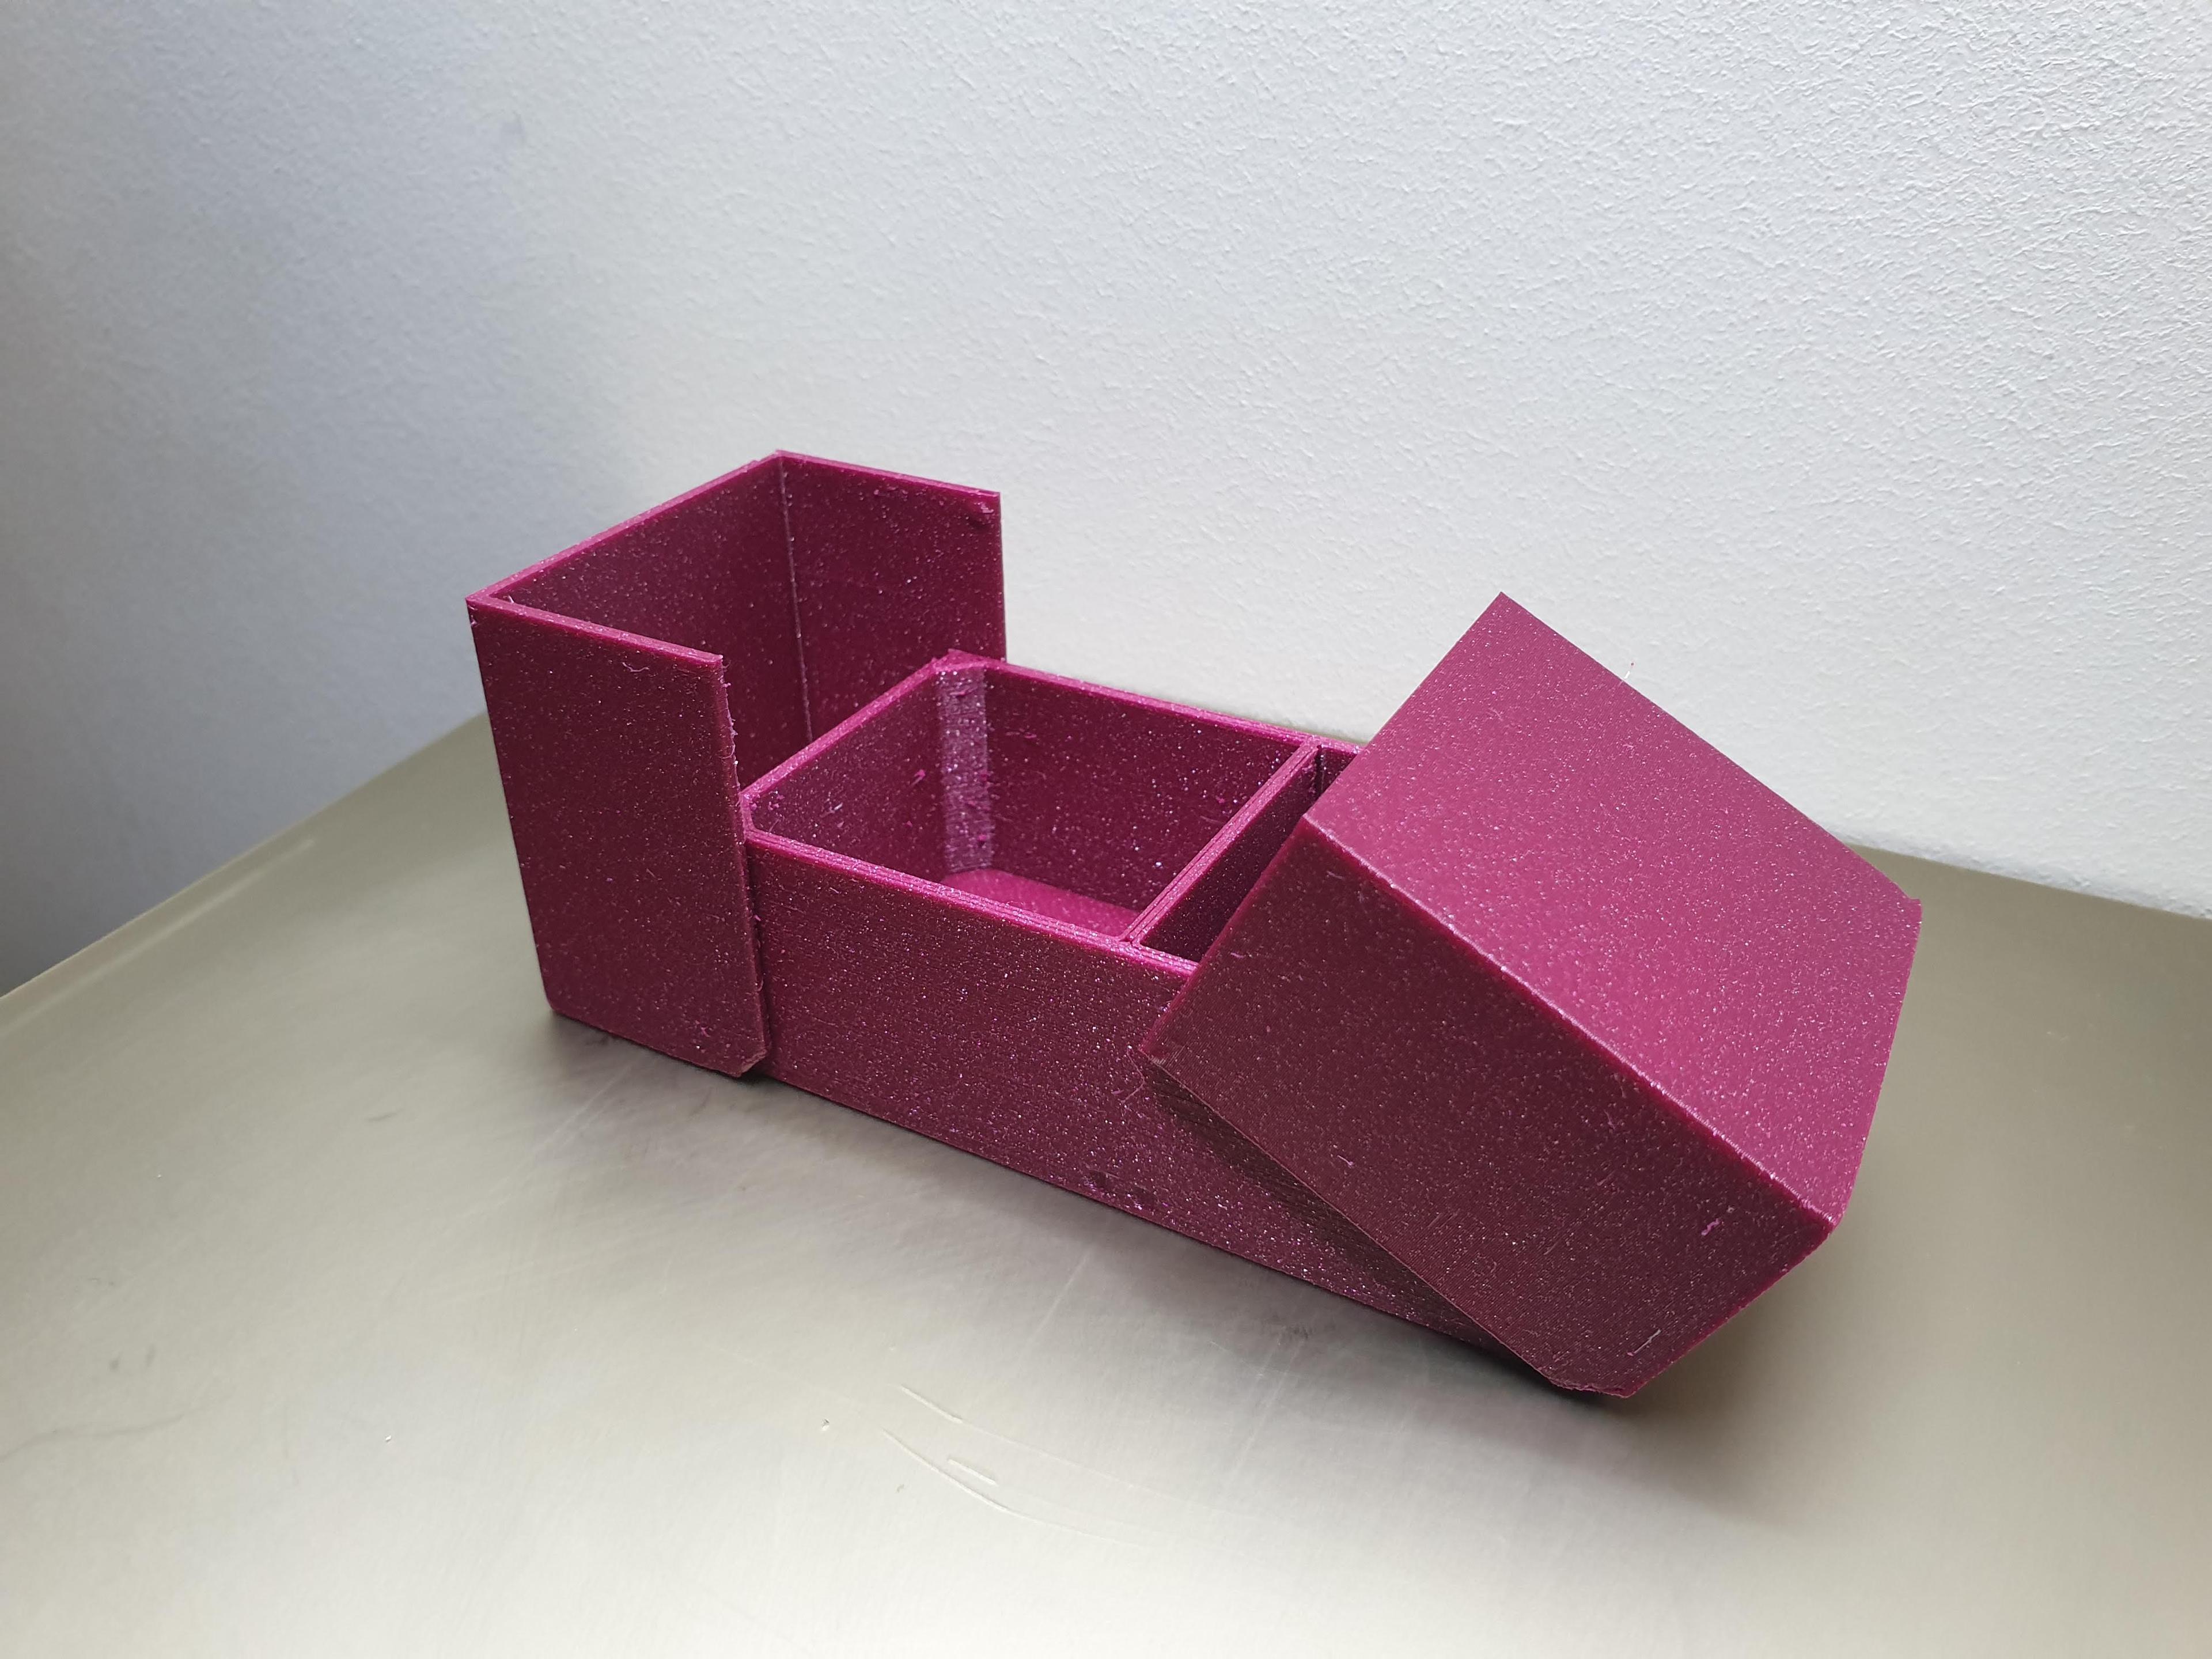 BOX DIVIDER - Various box / drawer dividers for small part organizer - fast  print - 3D model by Olo Deepdelver on Thangs